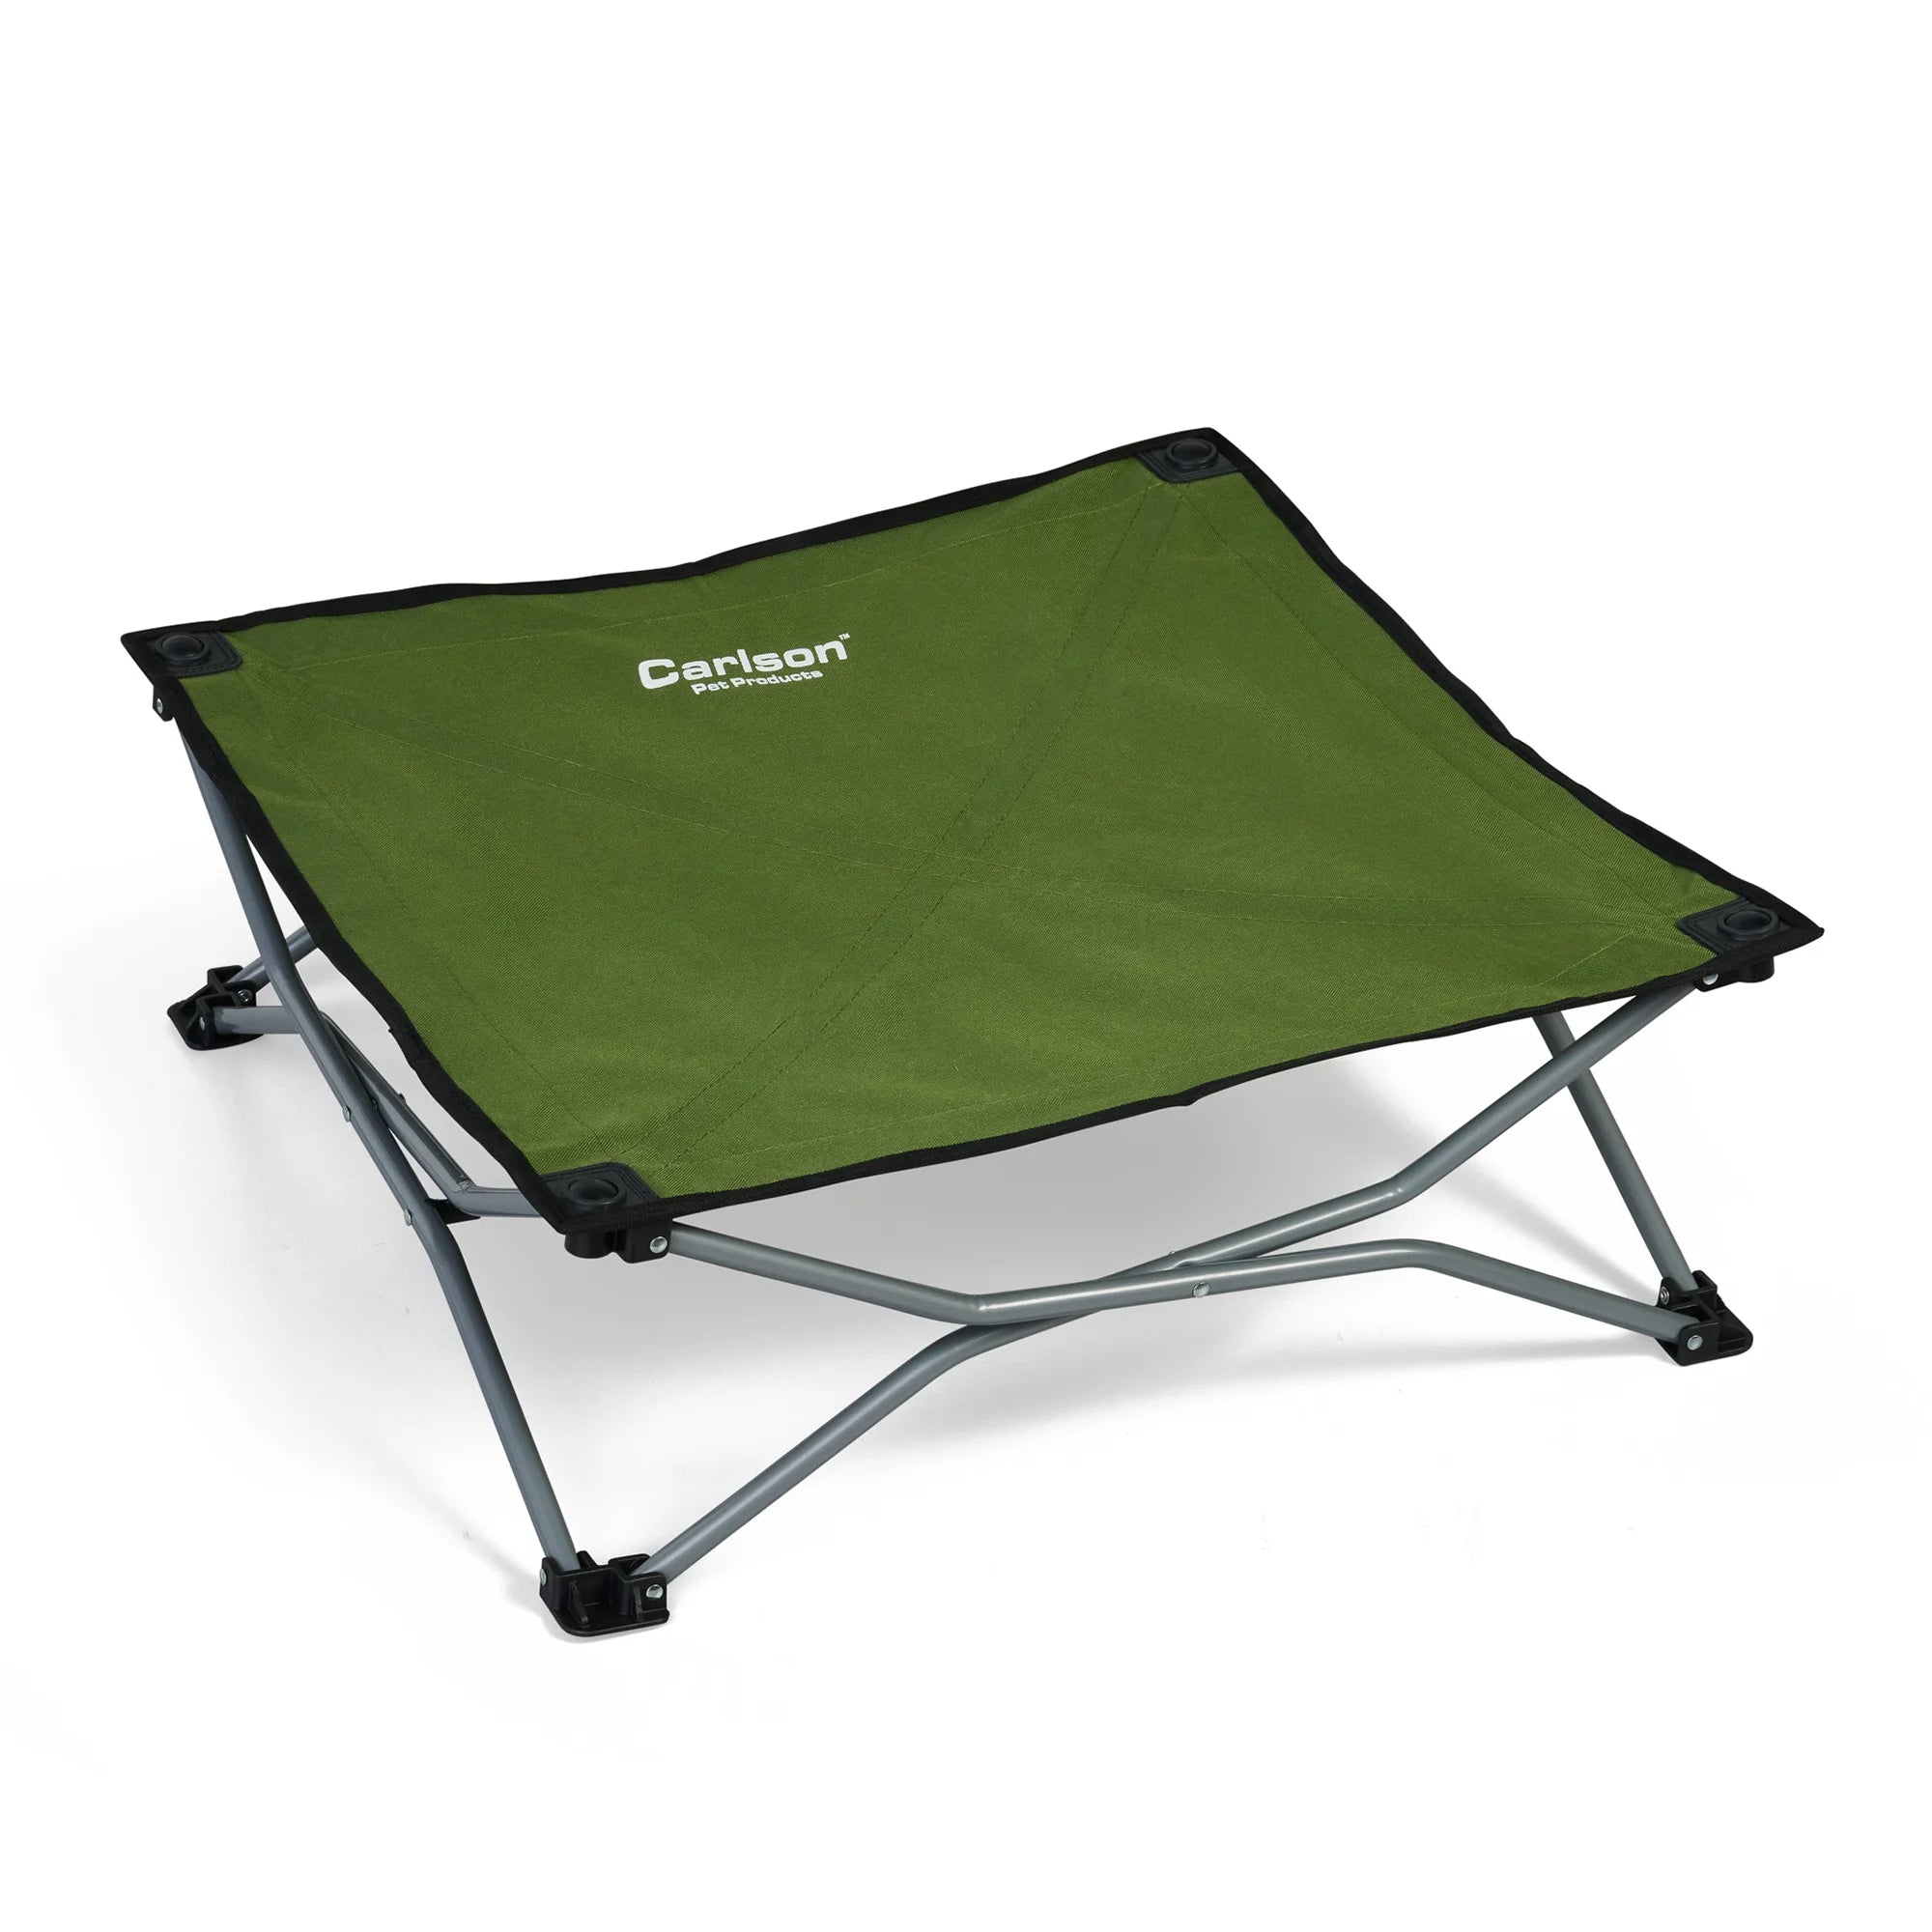 Small Portable Pup Pet Bed - Green